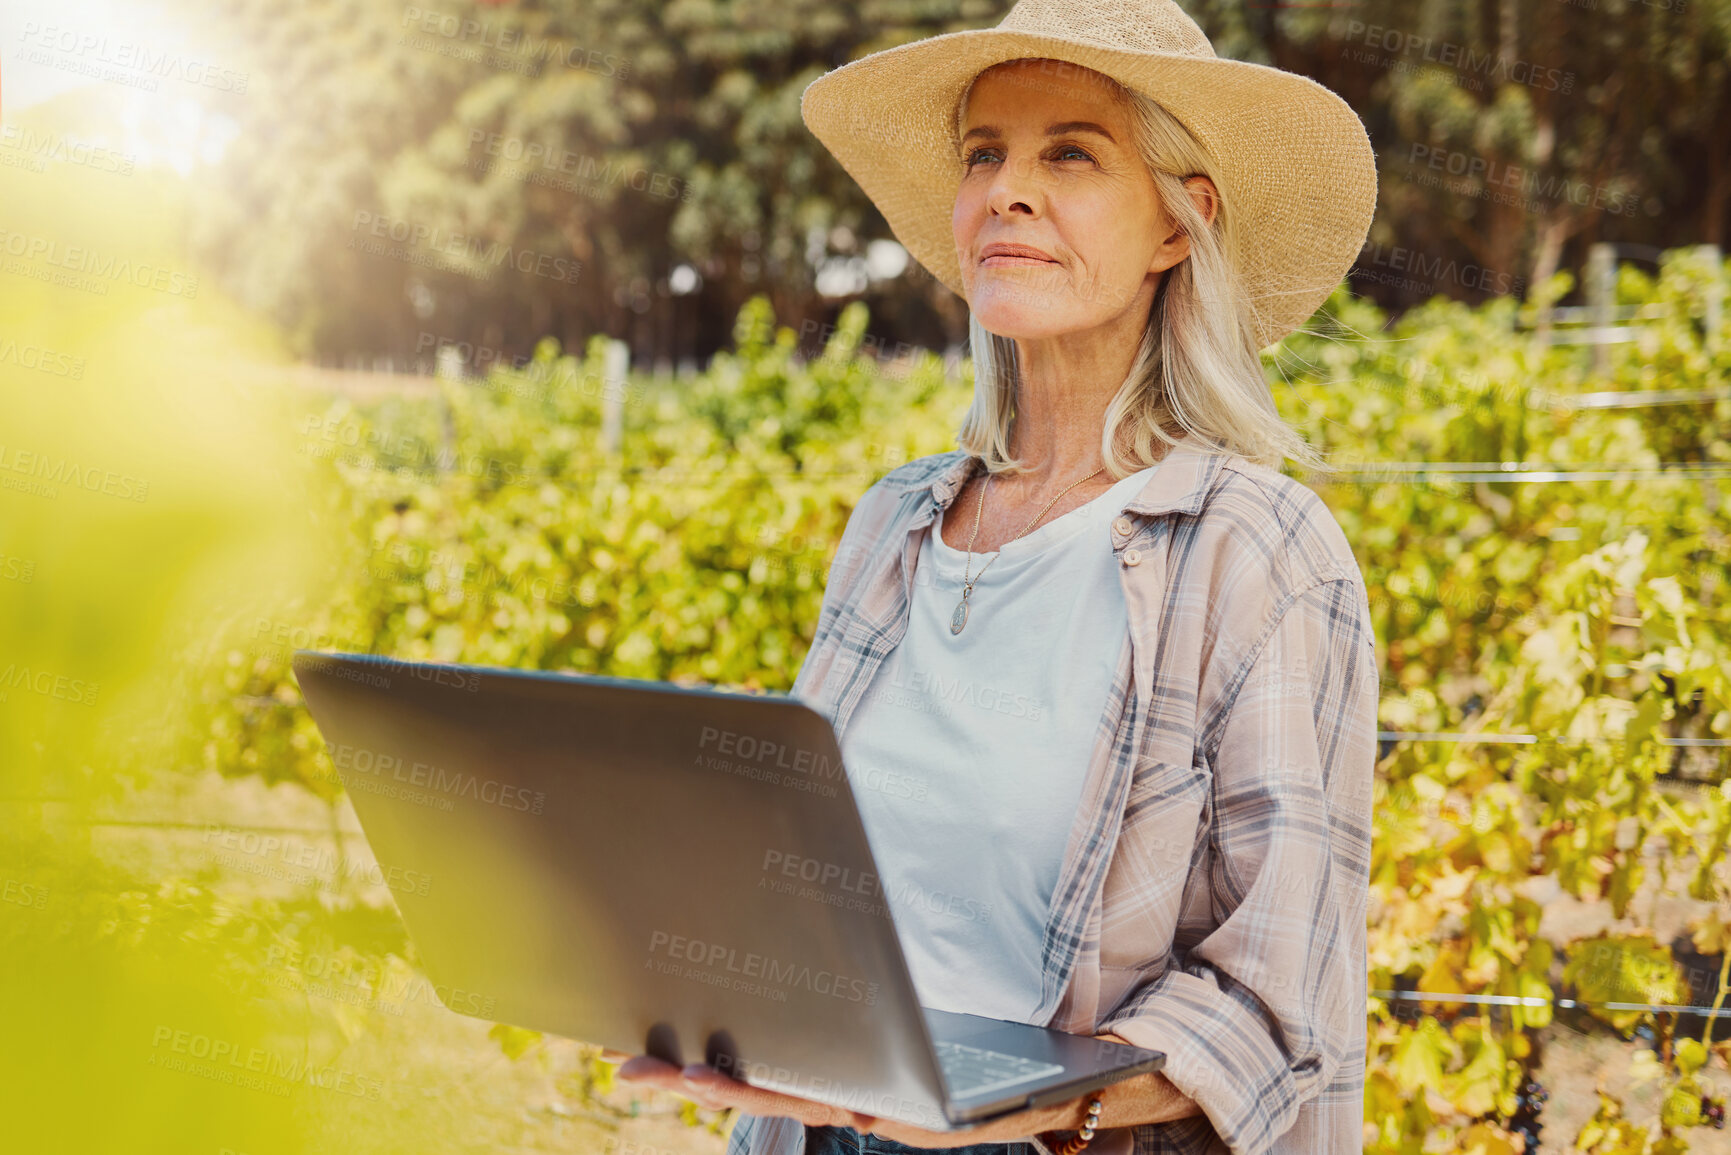 Buy stock photo One serious senior farmer holding and using a laptop on a vineyard. Elderly Caucasian woman browsing the internet around her crops and produce on wine farm in summer. Staying connected online on farm